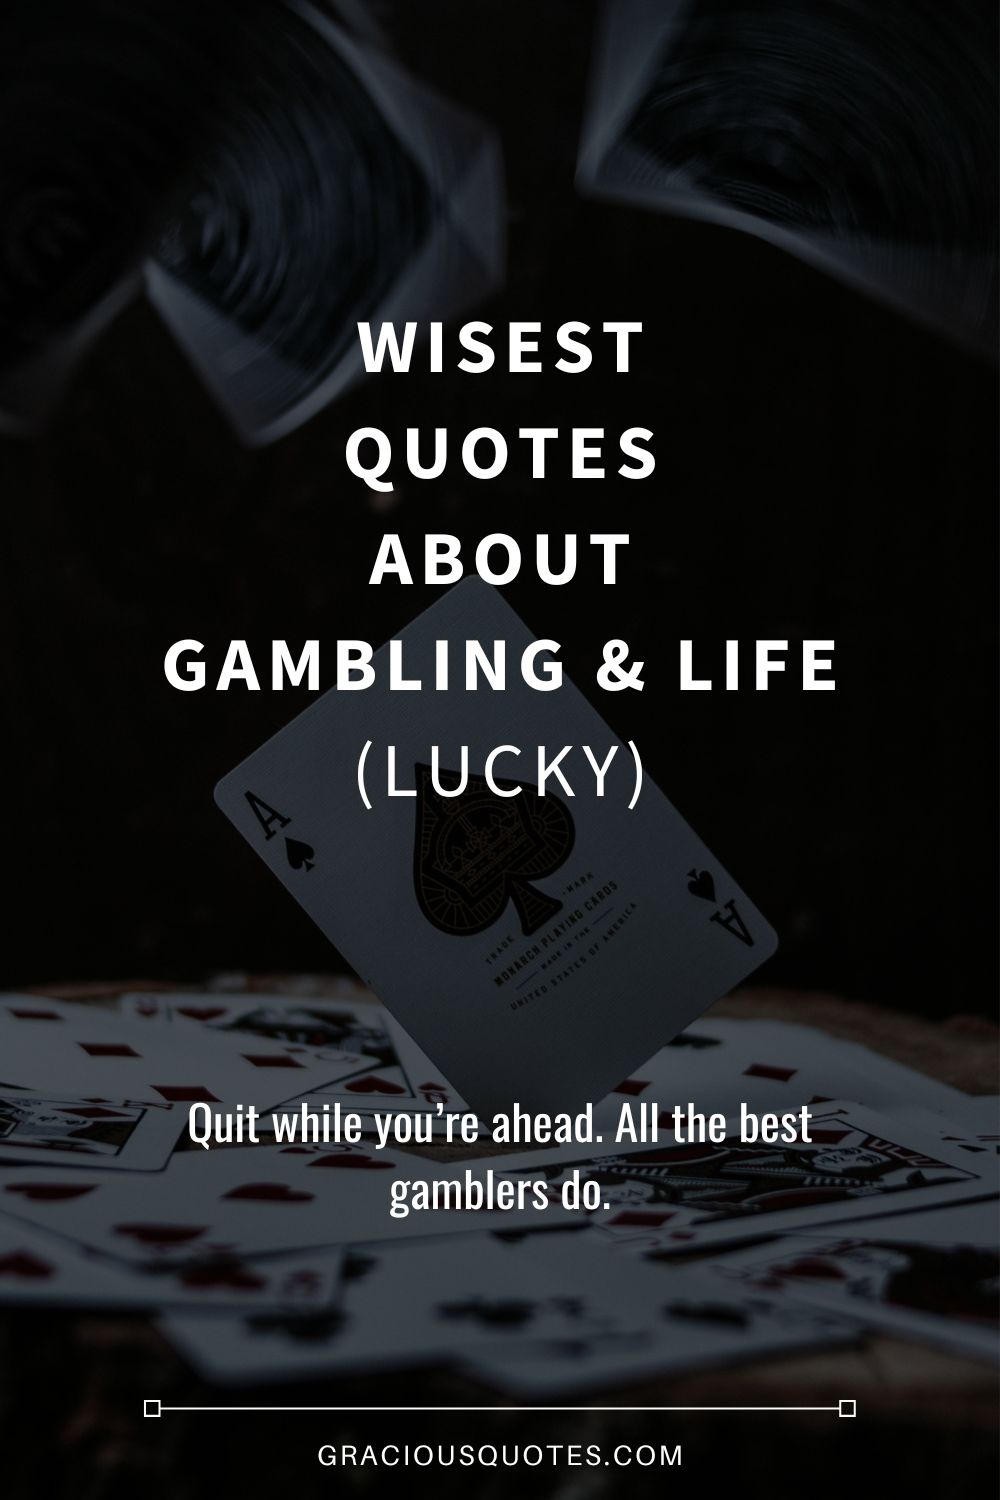 Wisest Quotes About Gambling & Life (LUCKY) - Gracious Quotes